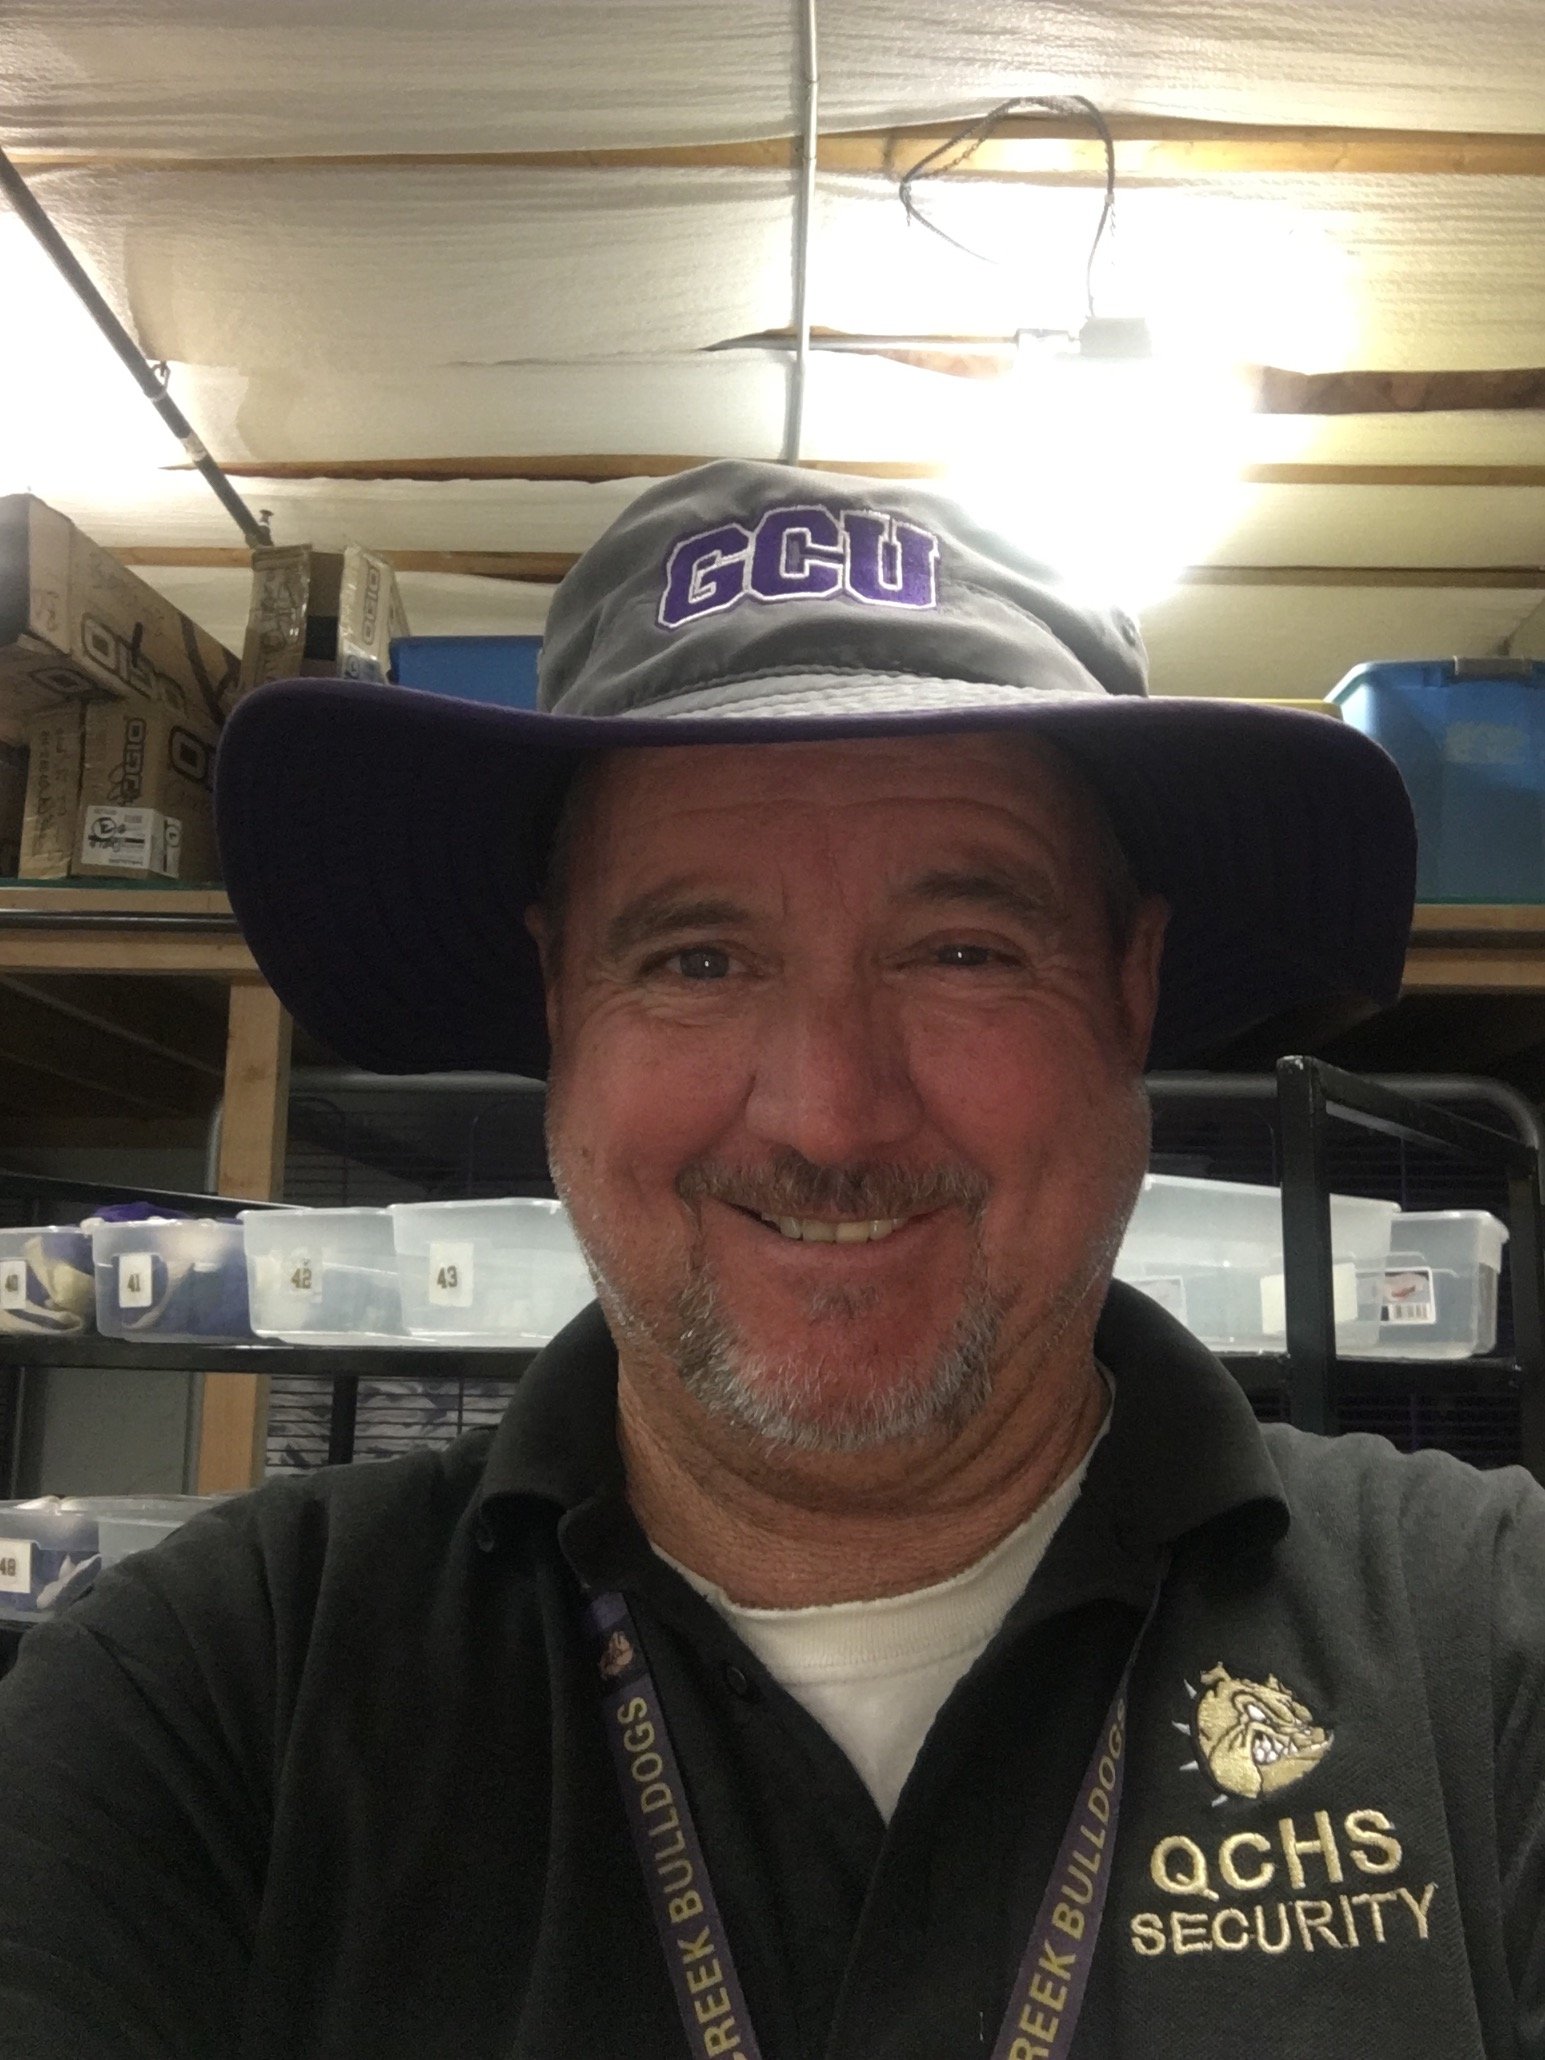 Athletic Equipment Manager @ QCHS